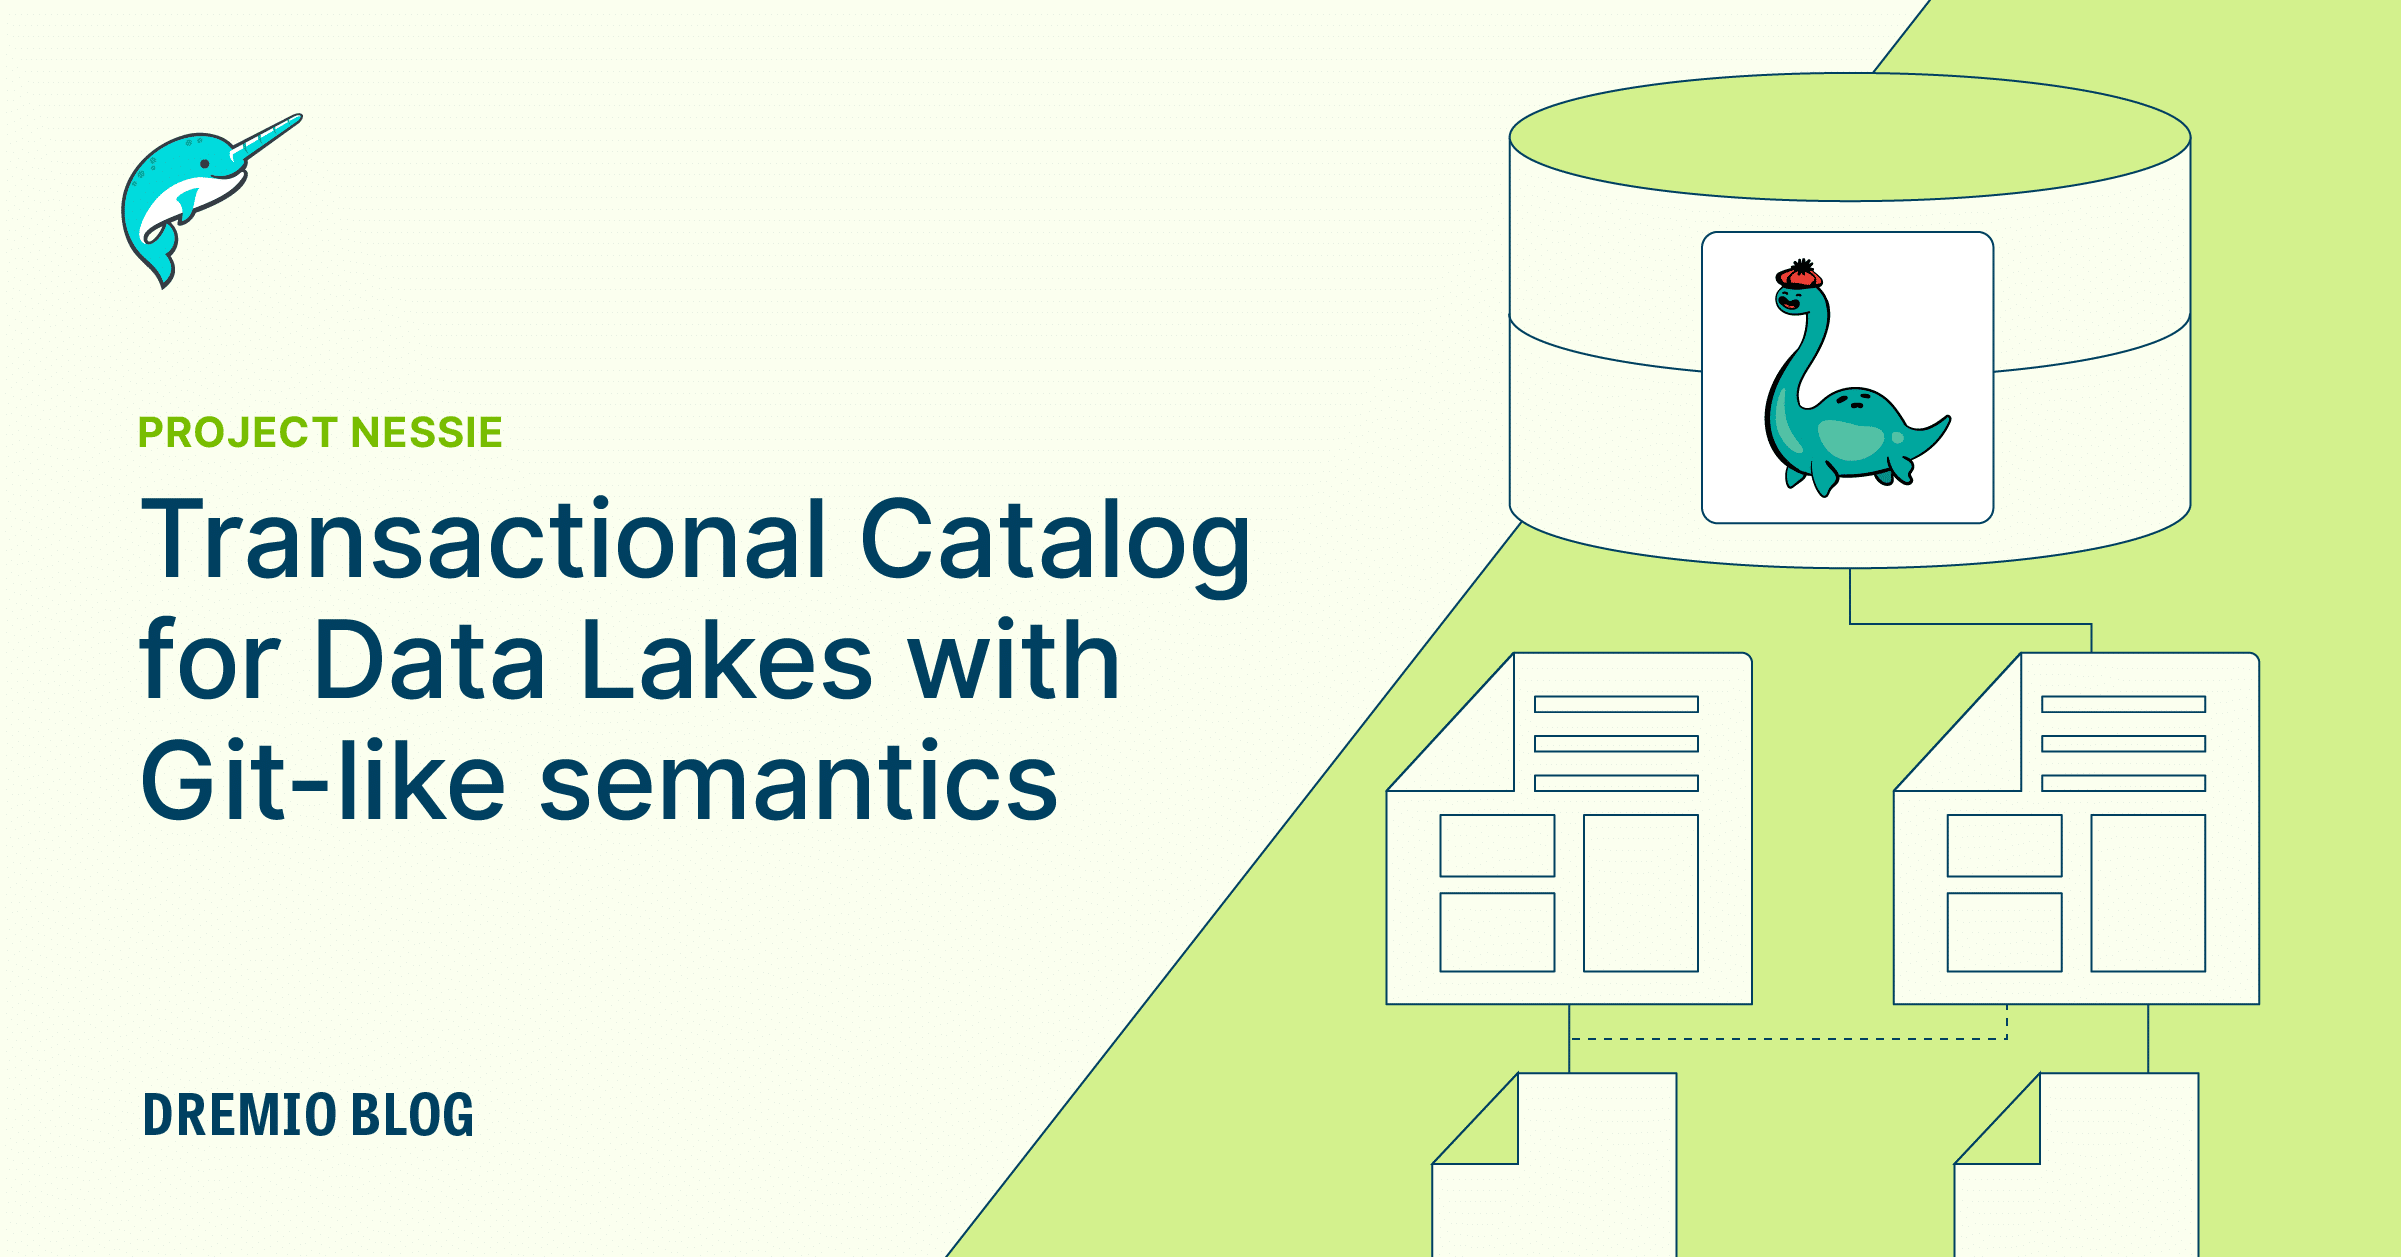 Project Nessie: Transactional Catalog for Data Lakes with Git-like semantics